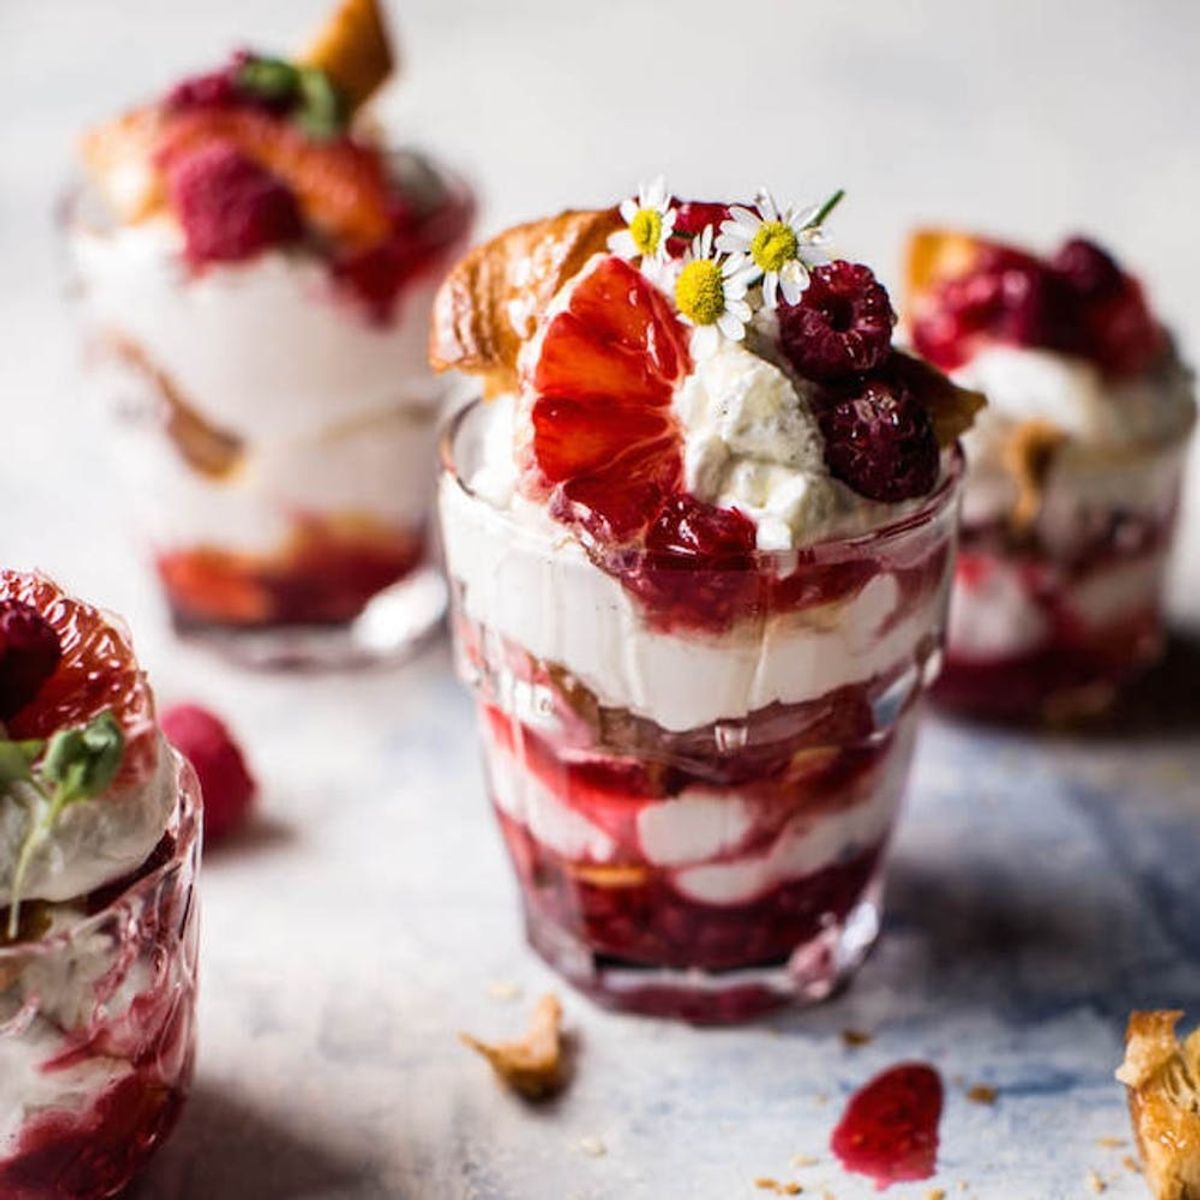 12 Fruity *Fool* Recipes to Celebrate April Fools’ Day